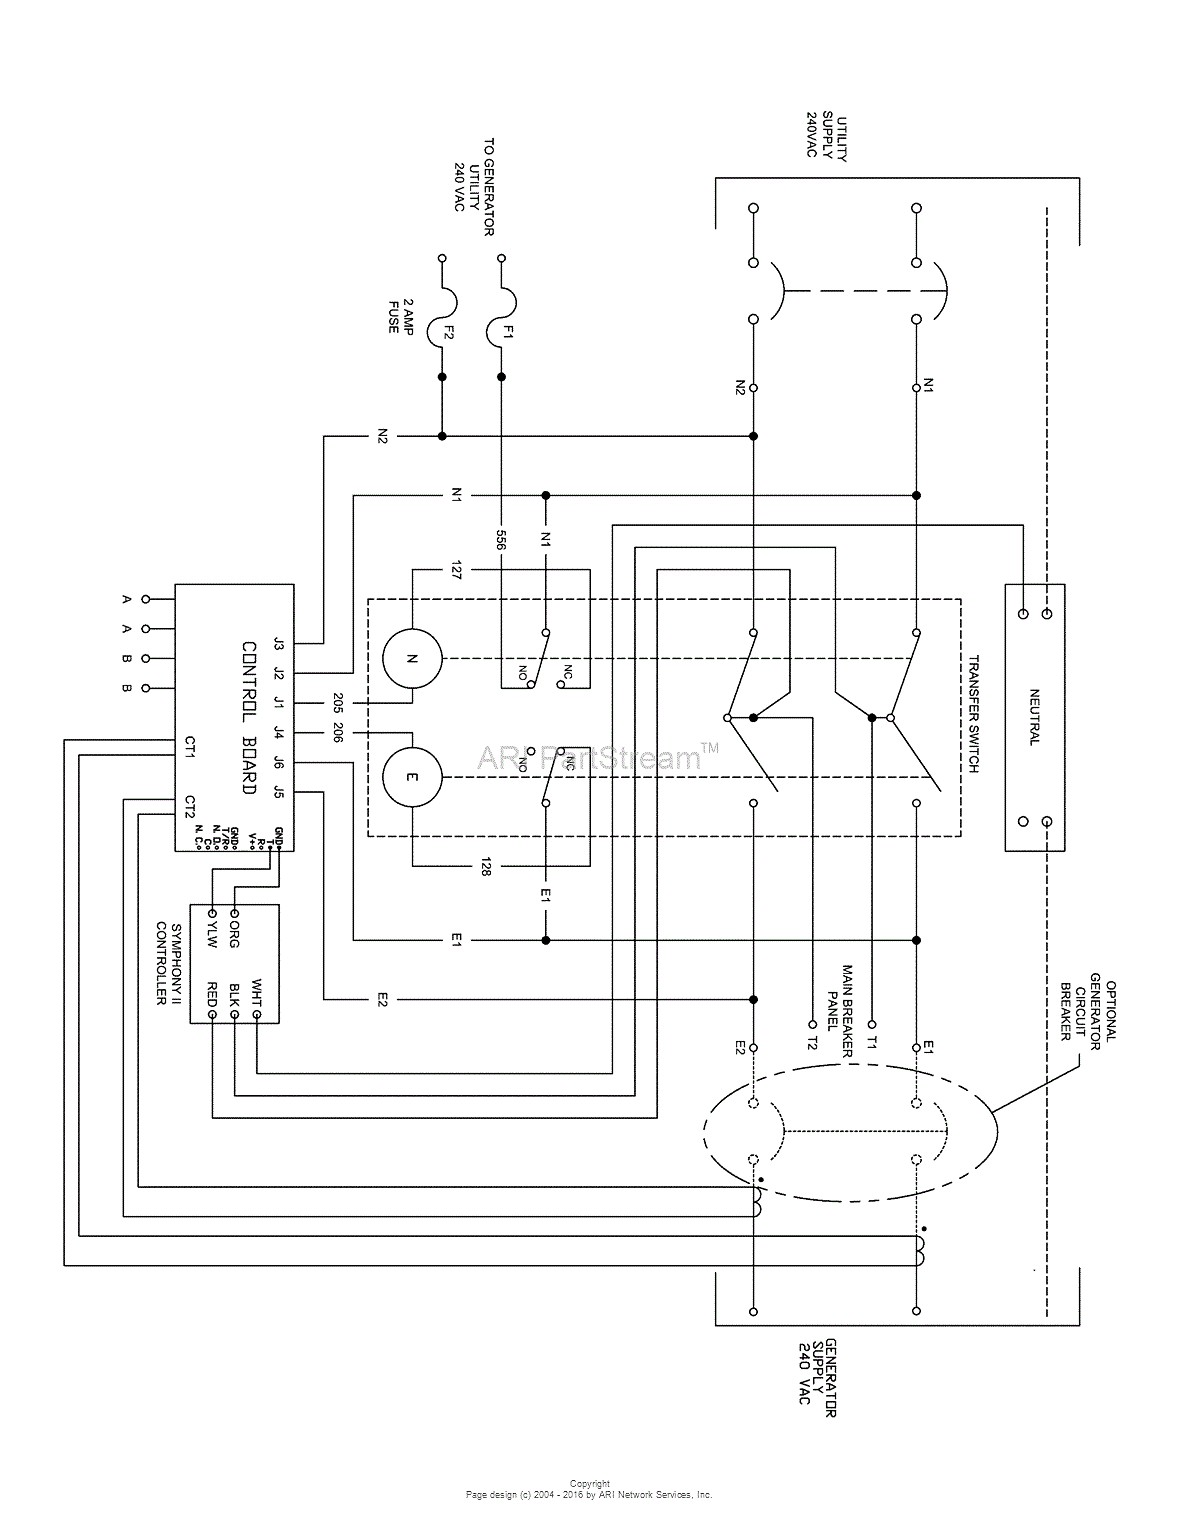 Briggs And Stratton Power Products 01 200 Amp Automatic Showy Generac Transfer Switch Wiring Diagram